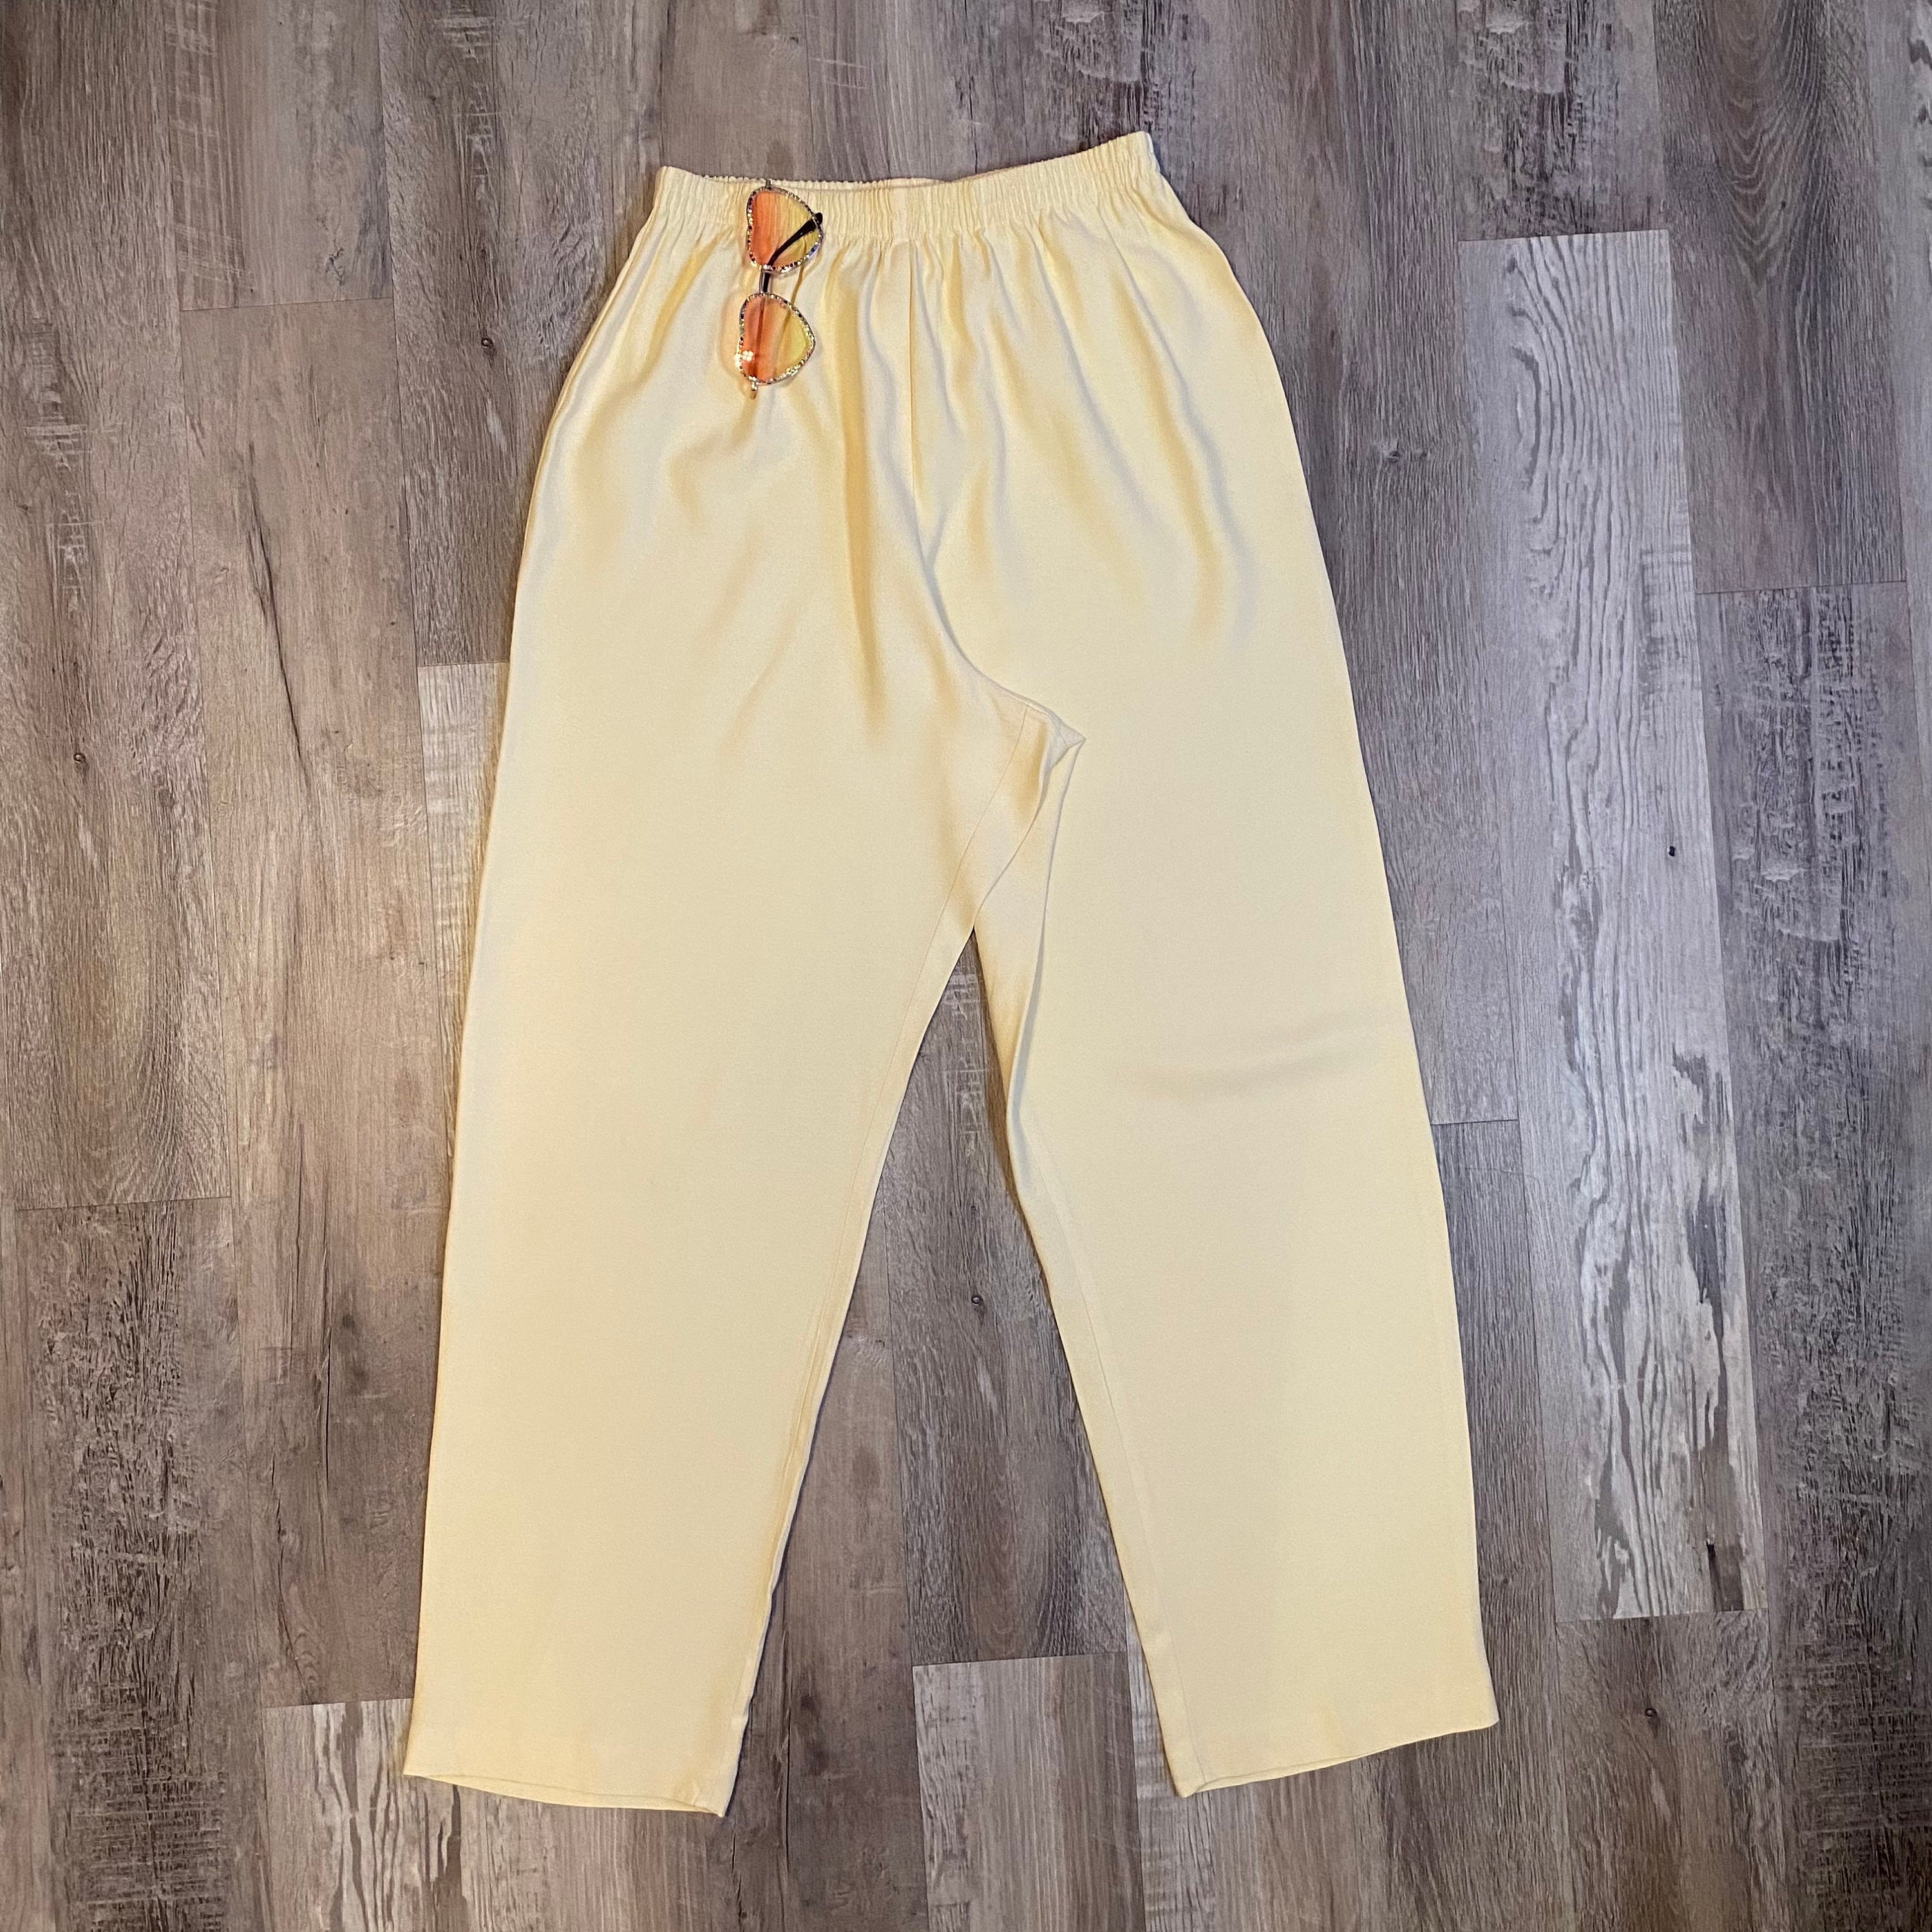 80S Parachute Pants for sale | Only 2 left at -60%